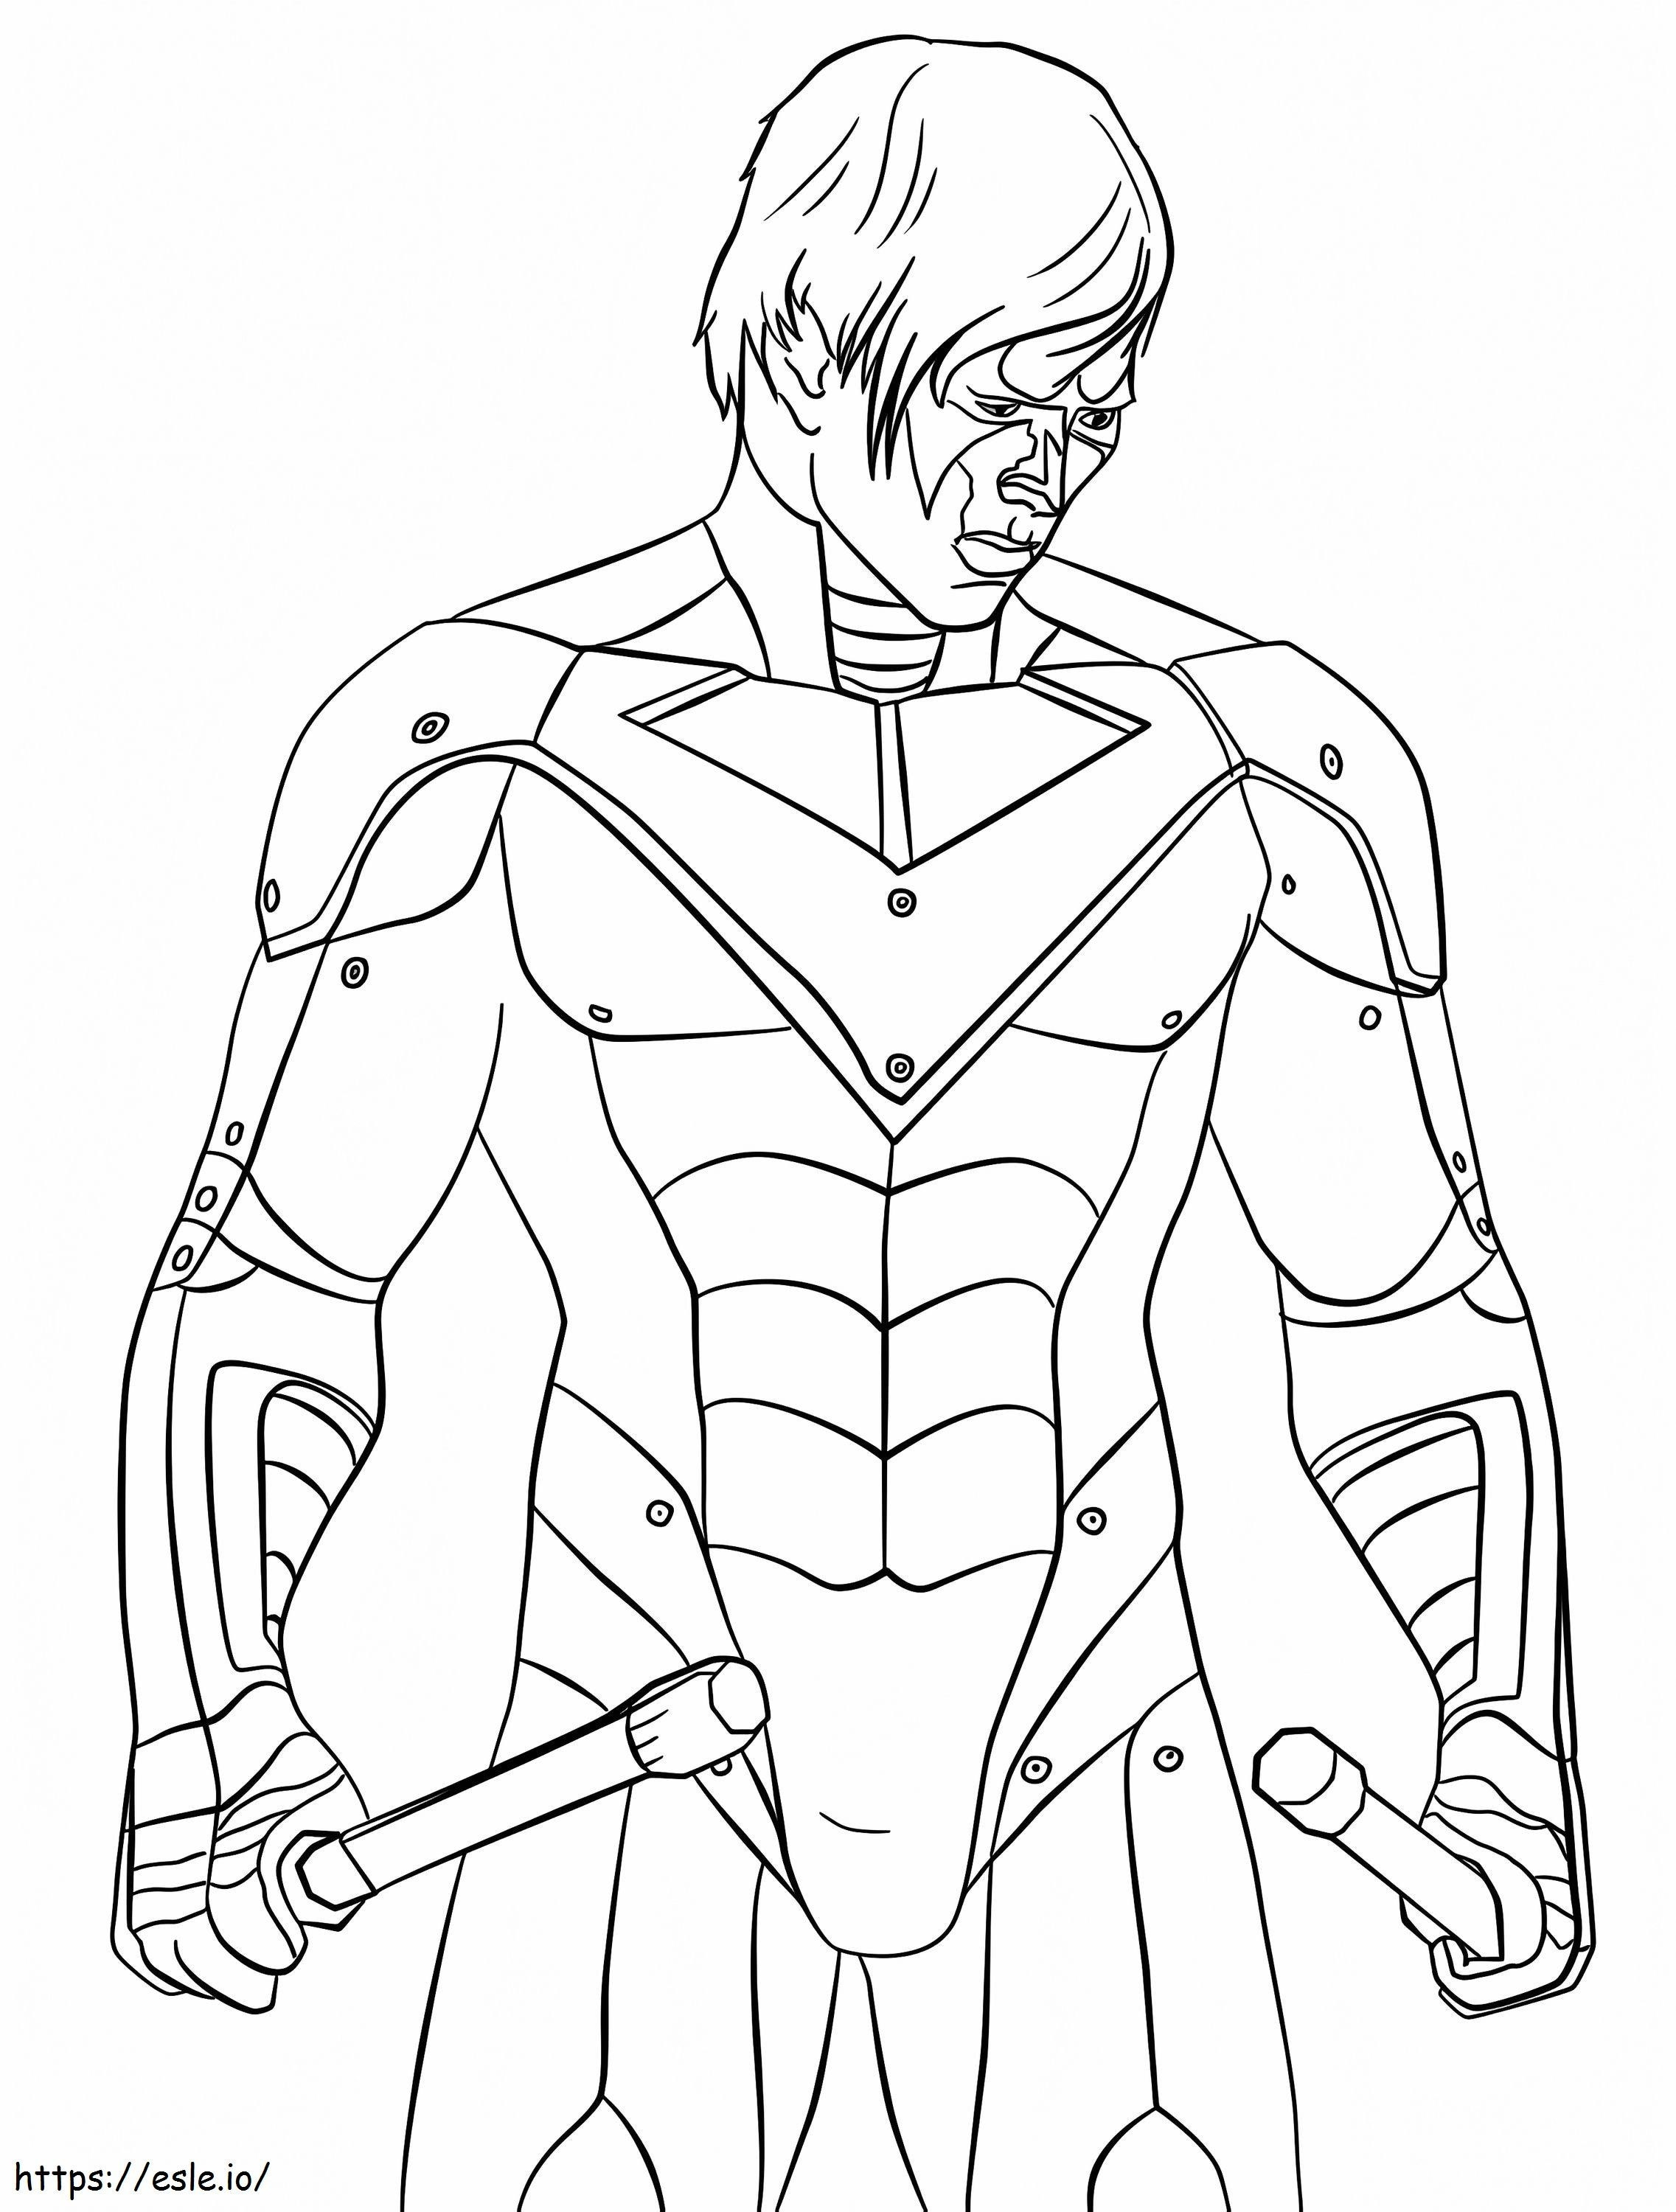 The Nightwing coloring page